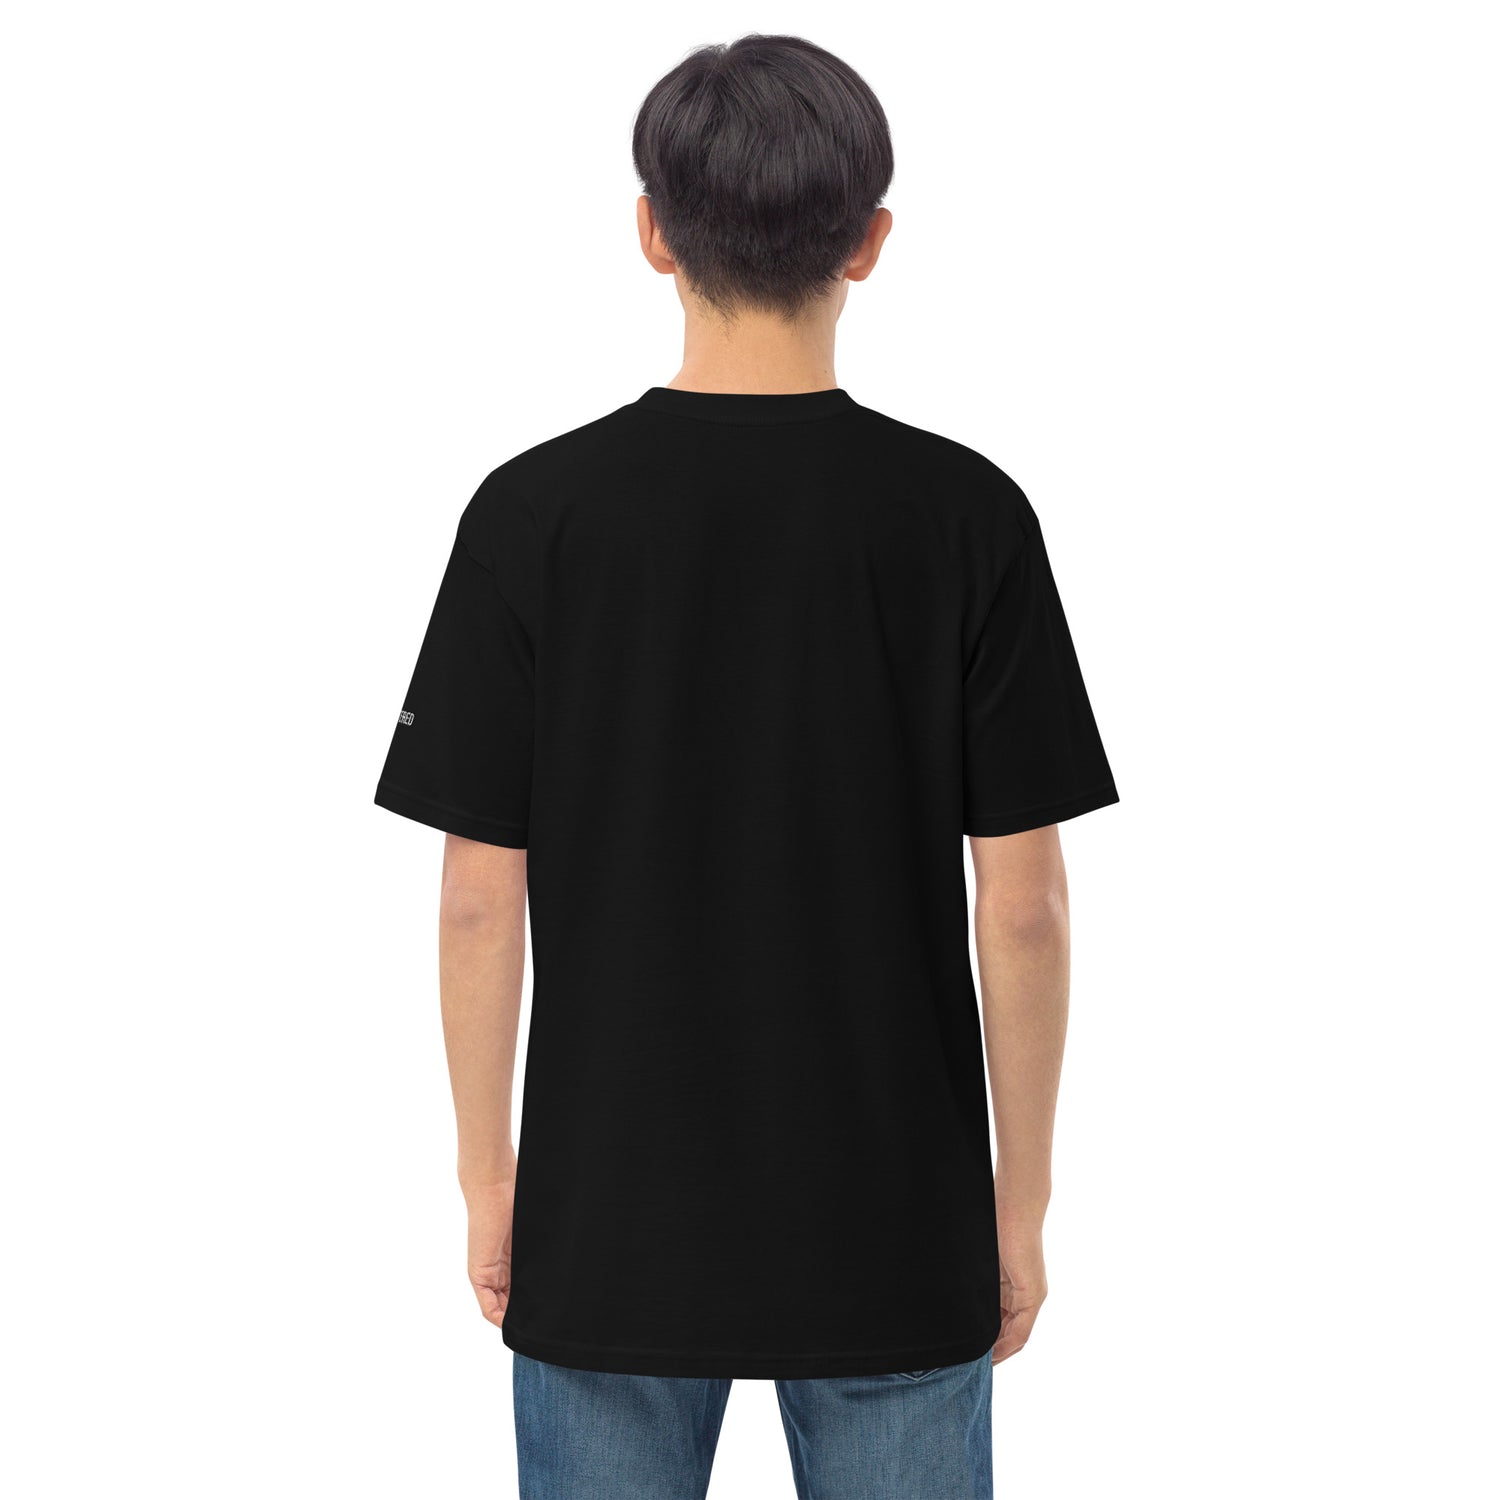 New York Apple Logo Embroidered Black T-Shirt Scattered Streetwear